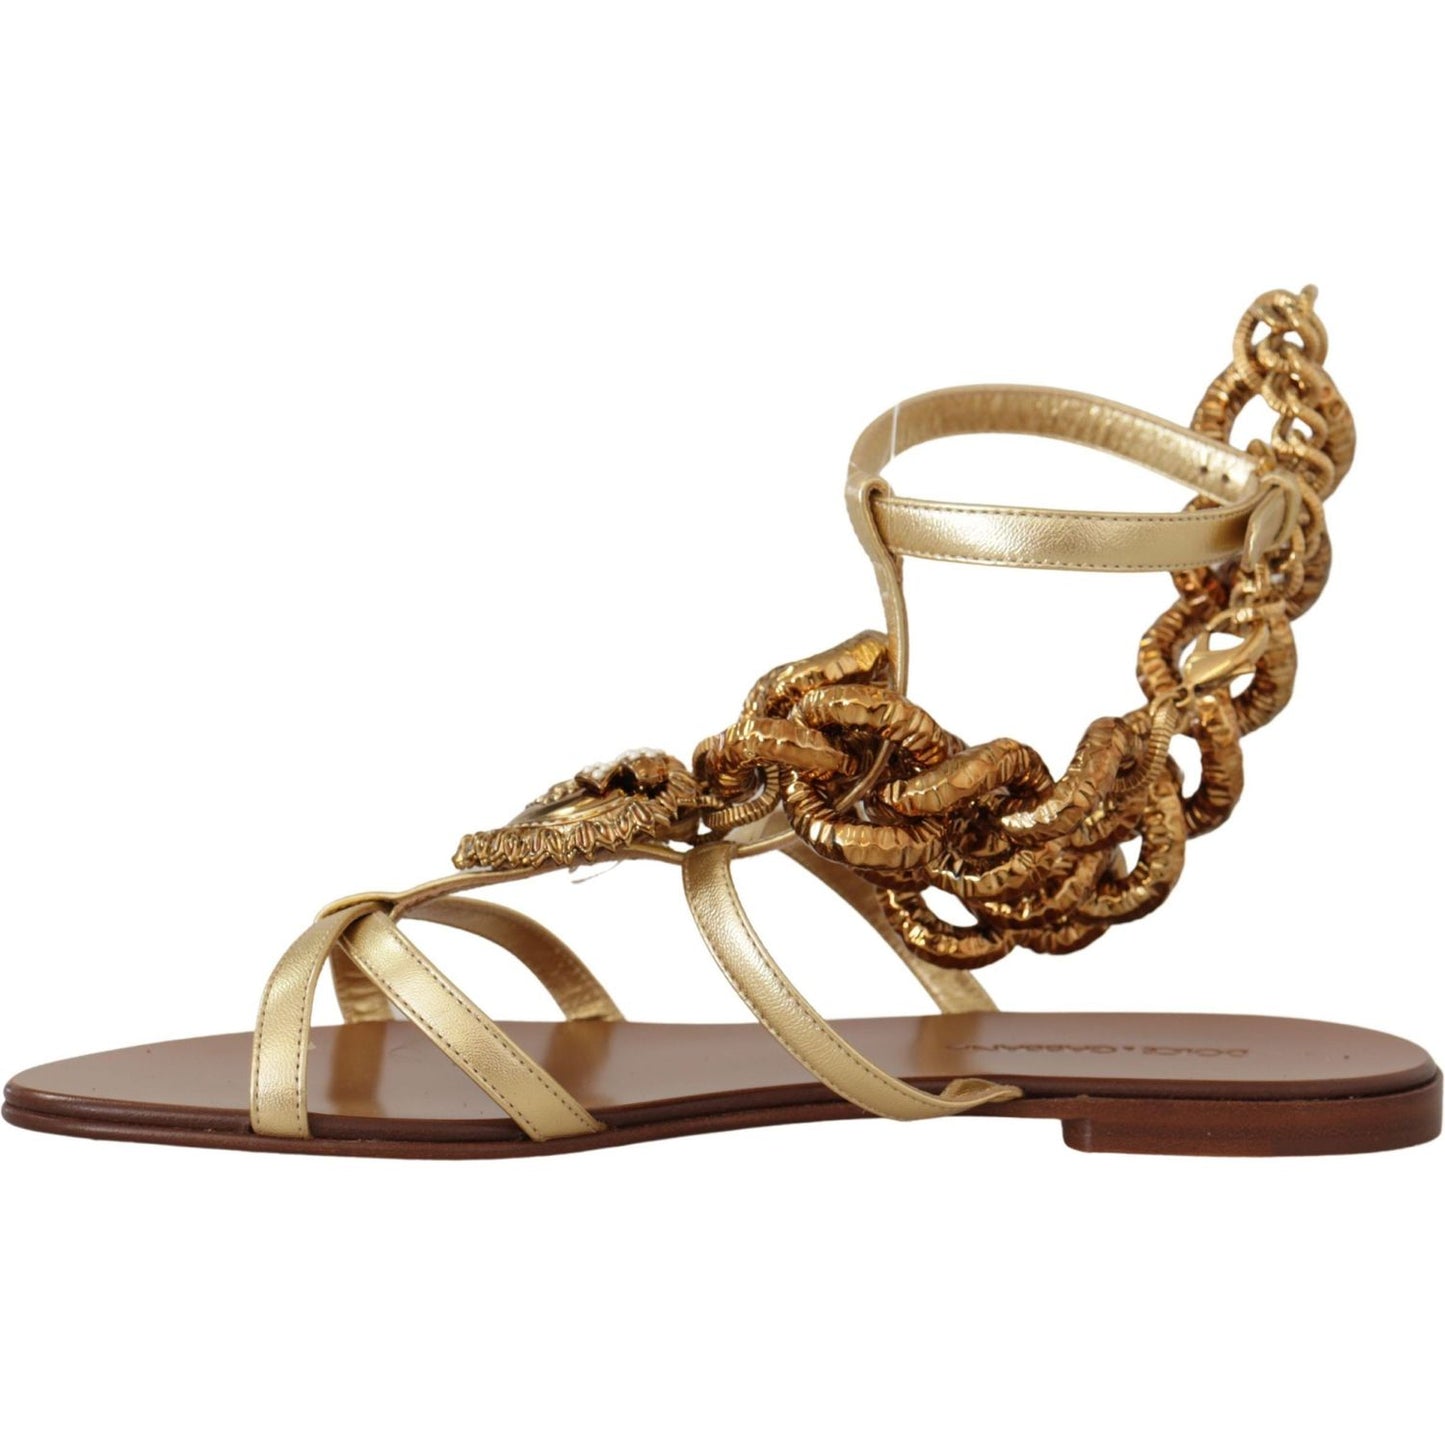 Dolce & Gabbana Chic Gladiator Flats with Heart and Chain Accents gold-leather-devotion-flats-sandals 21-scaled-8c38e49f-744.jpg